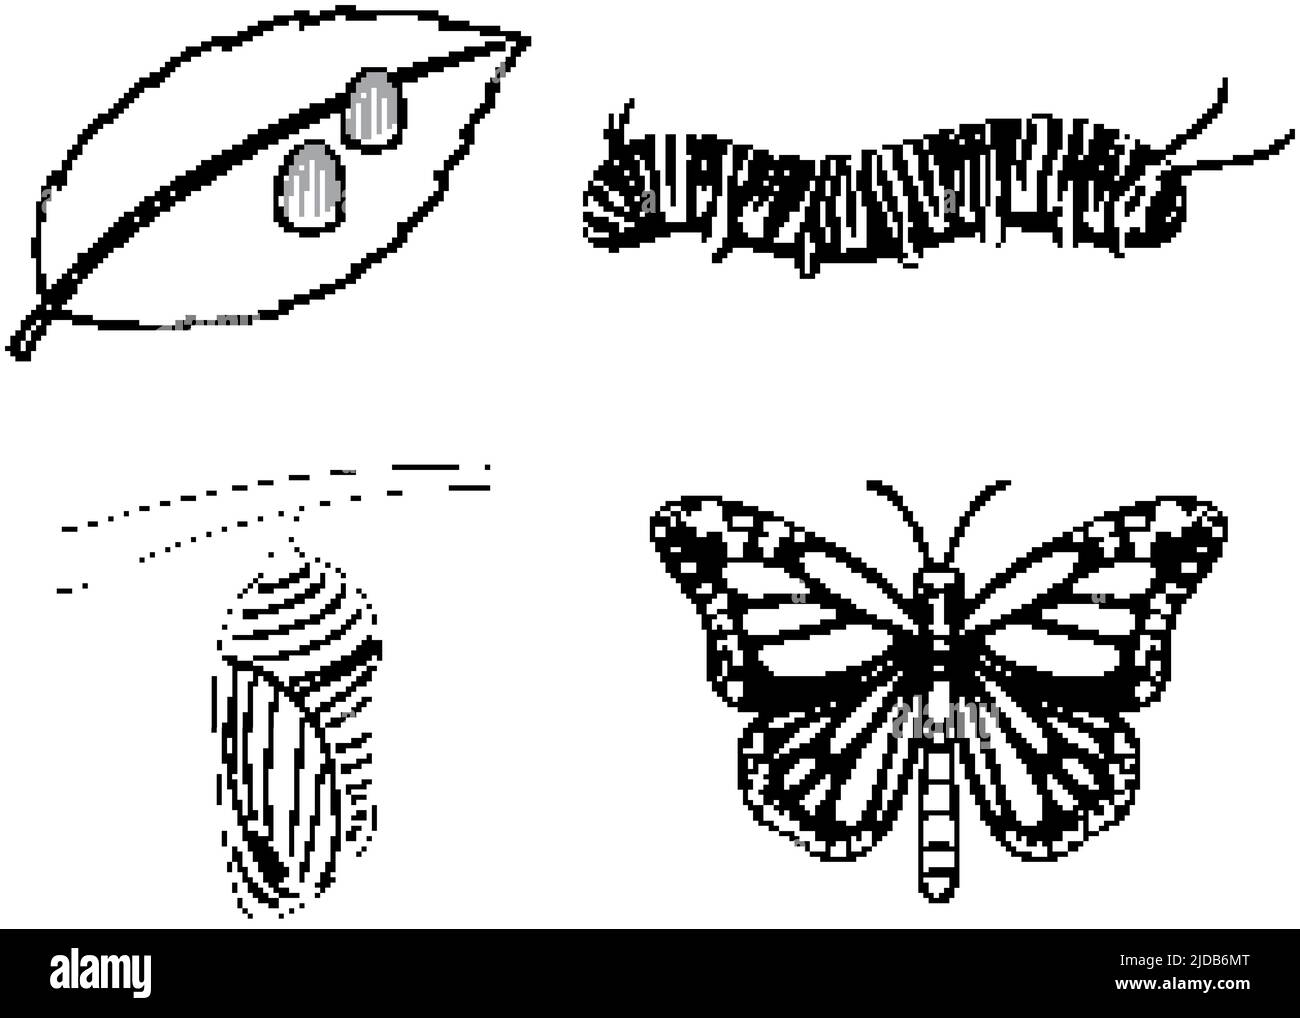 Life Cycle of Monarch Butterfly Doodle illustration Stock Vector